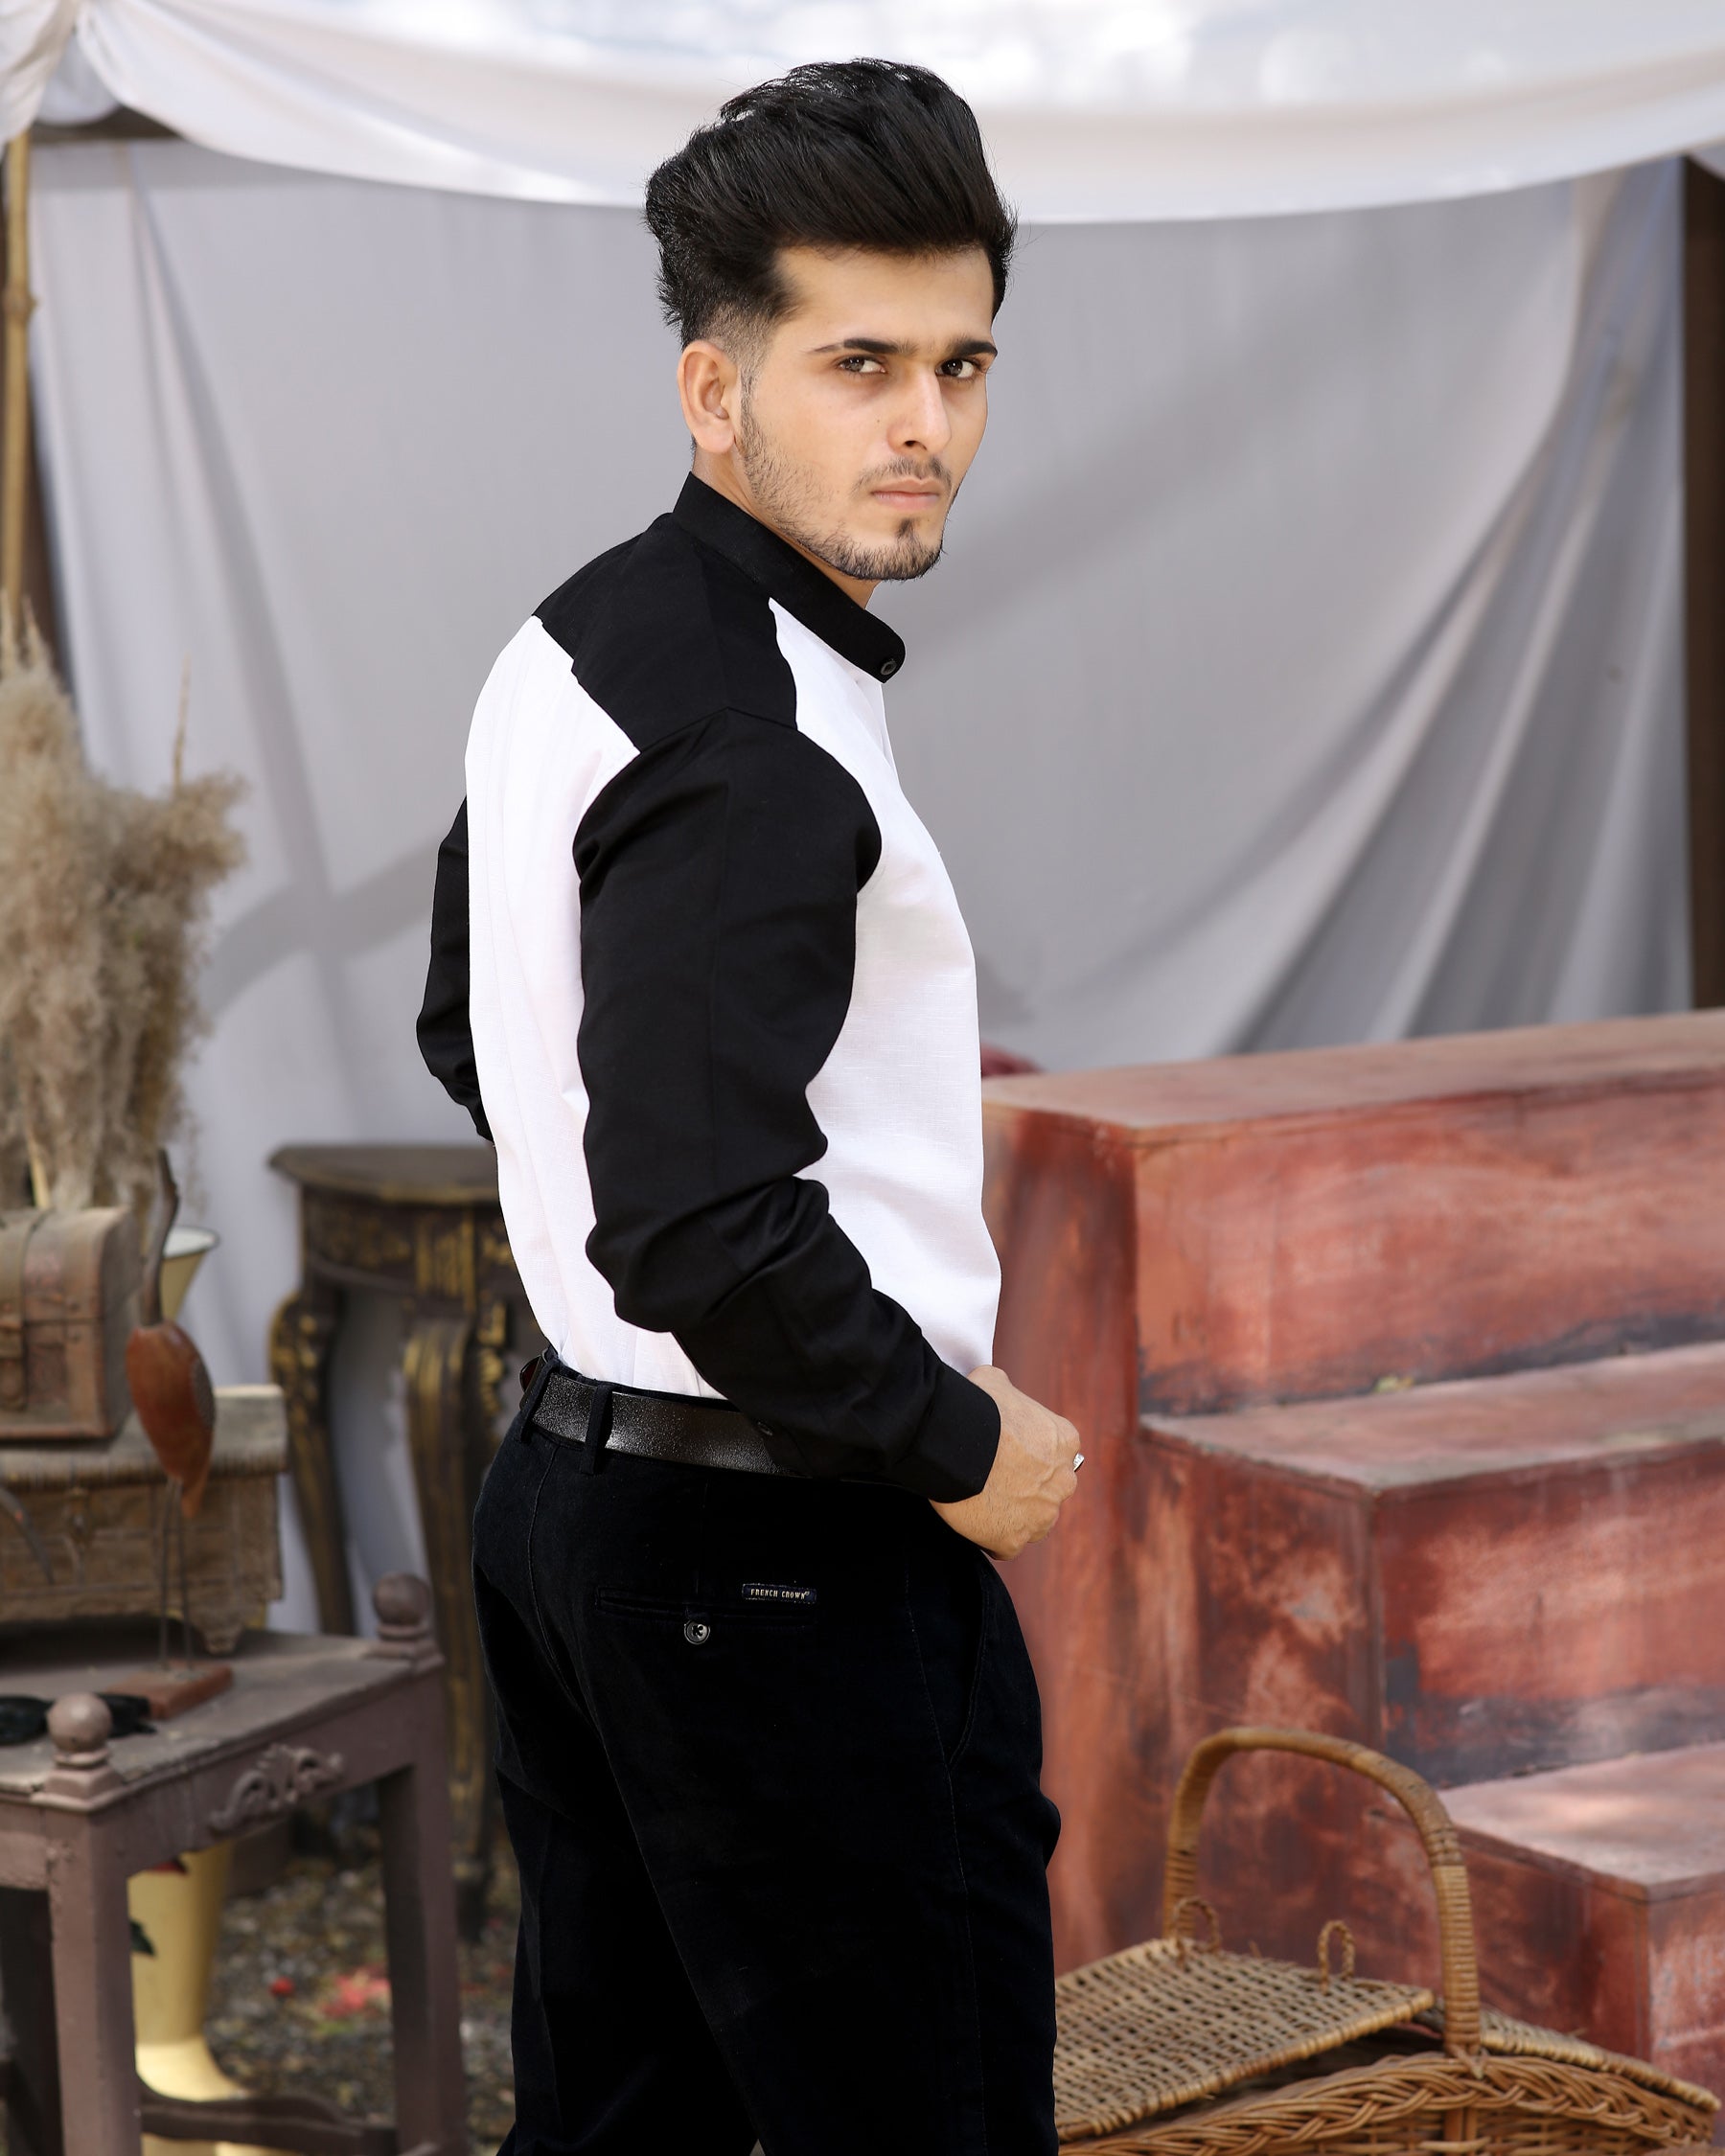 Bright White with Black Patterned Luxurious Linen Shirt 3188M-BLK-P17-38, 3188M-BLK-P17-H-38, 3188M-BLK-P17-39, 3188M-BLK-P17-H-39, 3188M-BLK-P17-40, 3188M-BLK-P17-H-40, 3188M-BLK-P17-42, 3188M-BLK-P17-H-42, 3188M-BLK-P17-44, 3188M-BLK-P17-H-44, 3188M-BLK-P17-46, 3188M-BLK-P17-H-46, 3188M-BLK-P17-48, 3188M-BLK-P17-H-48, 3188M-BLK-P17-50, 3188M-BLK-P17-H-50, 3188M-BLK-P17-52, 3188M-BLK-P17-H-52